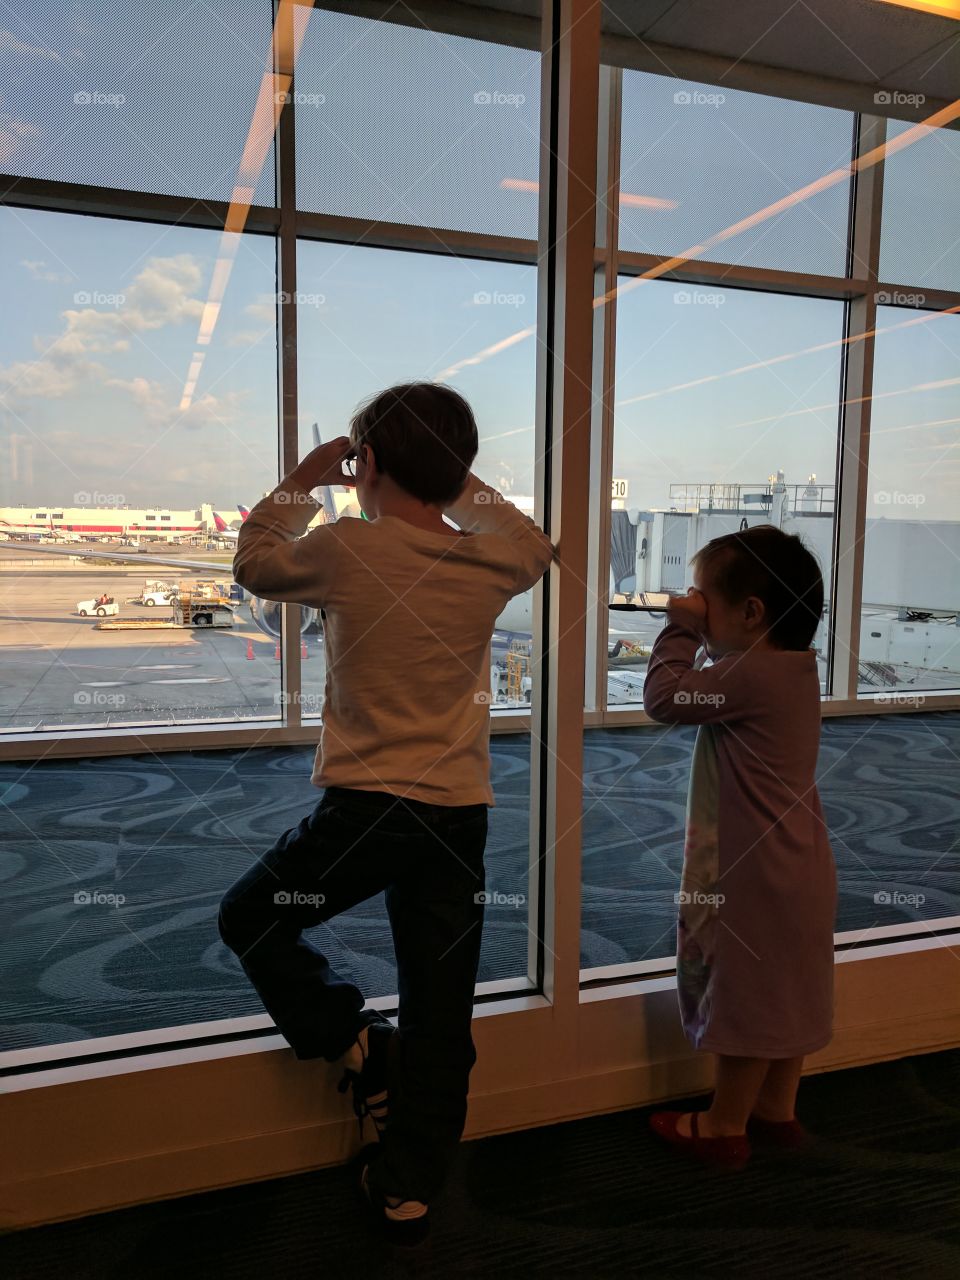 Dad works at Delta, so we flew to Seattle. The kids were mesmerized by the planes for about 40 seconds. I wish we knew how to ponder the mystery I while longer.